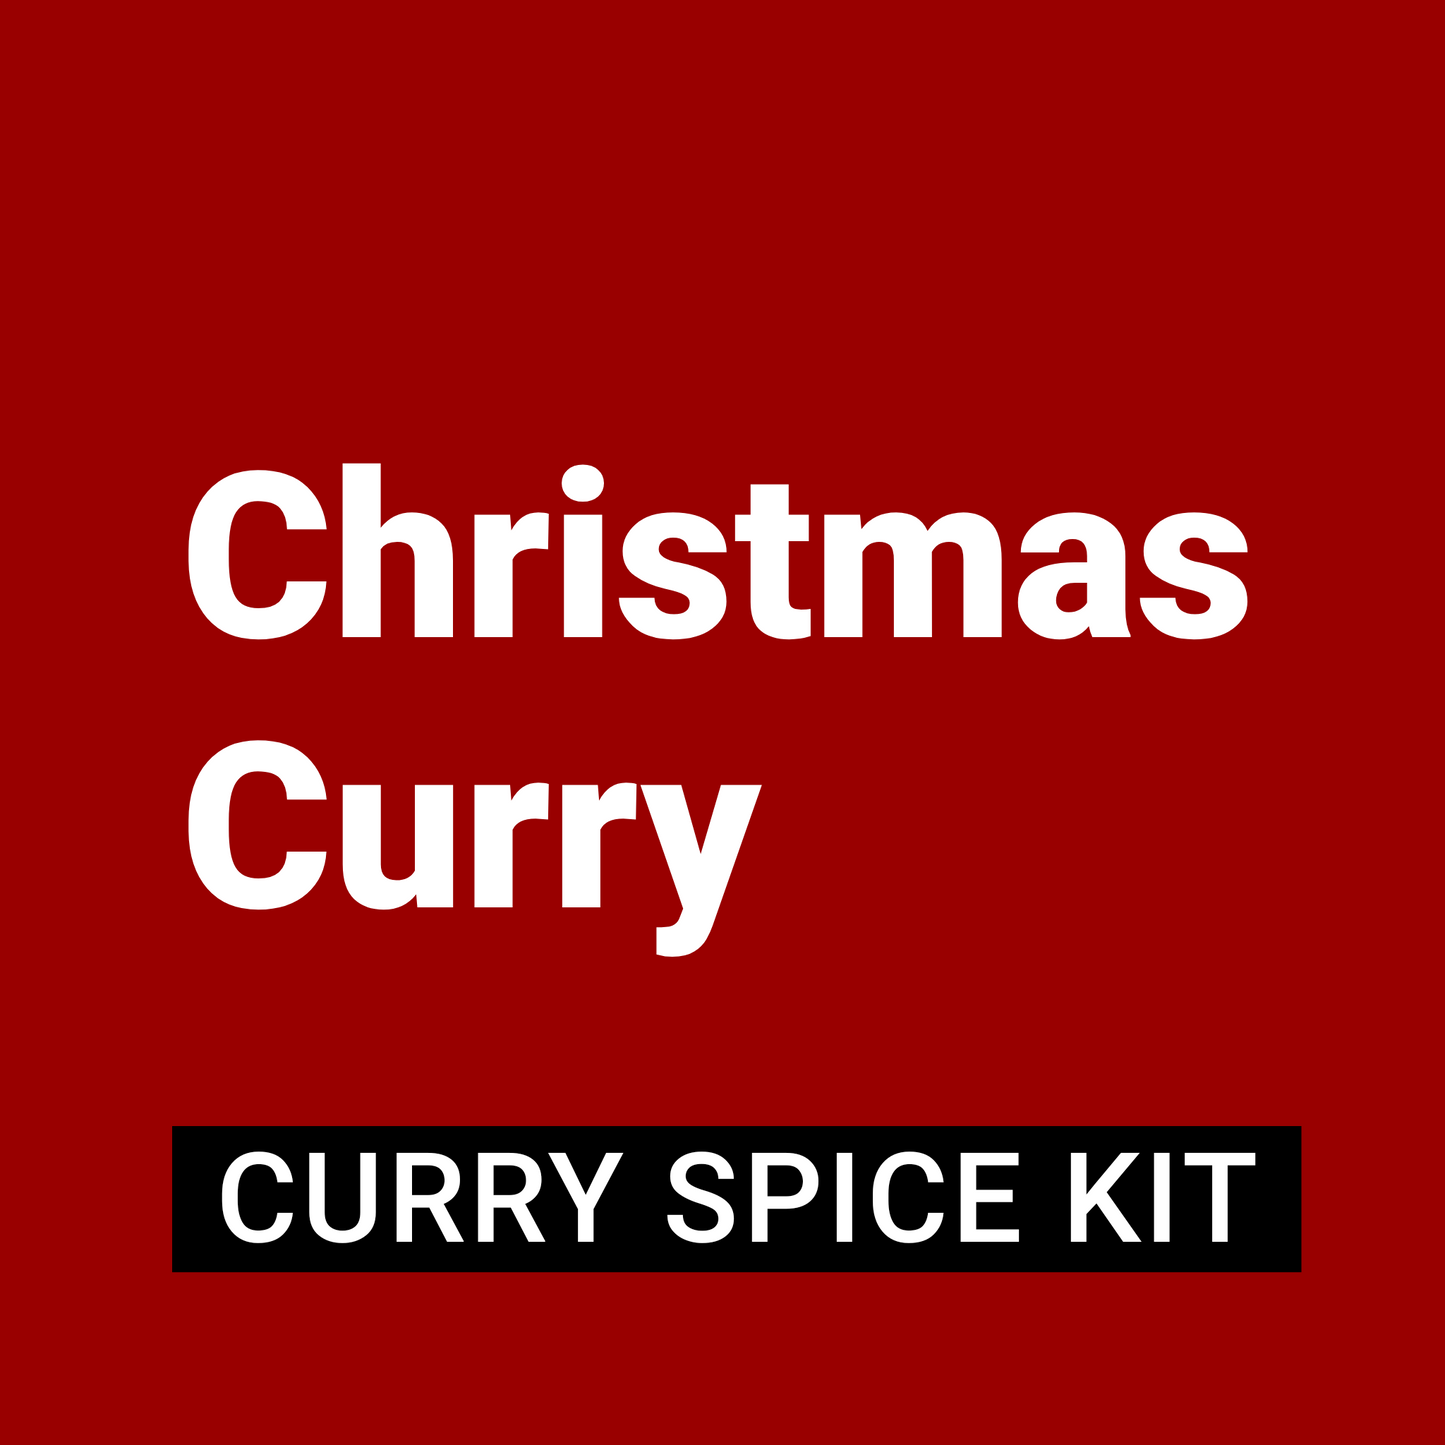 Christmas Curry Spice Kit - Limited Edition